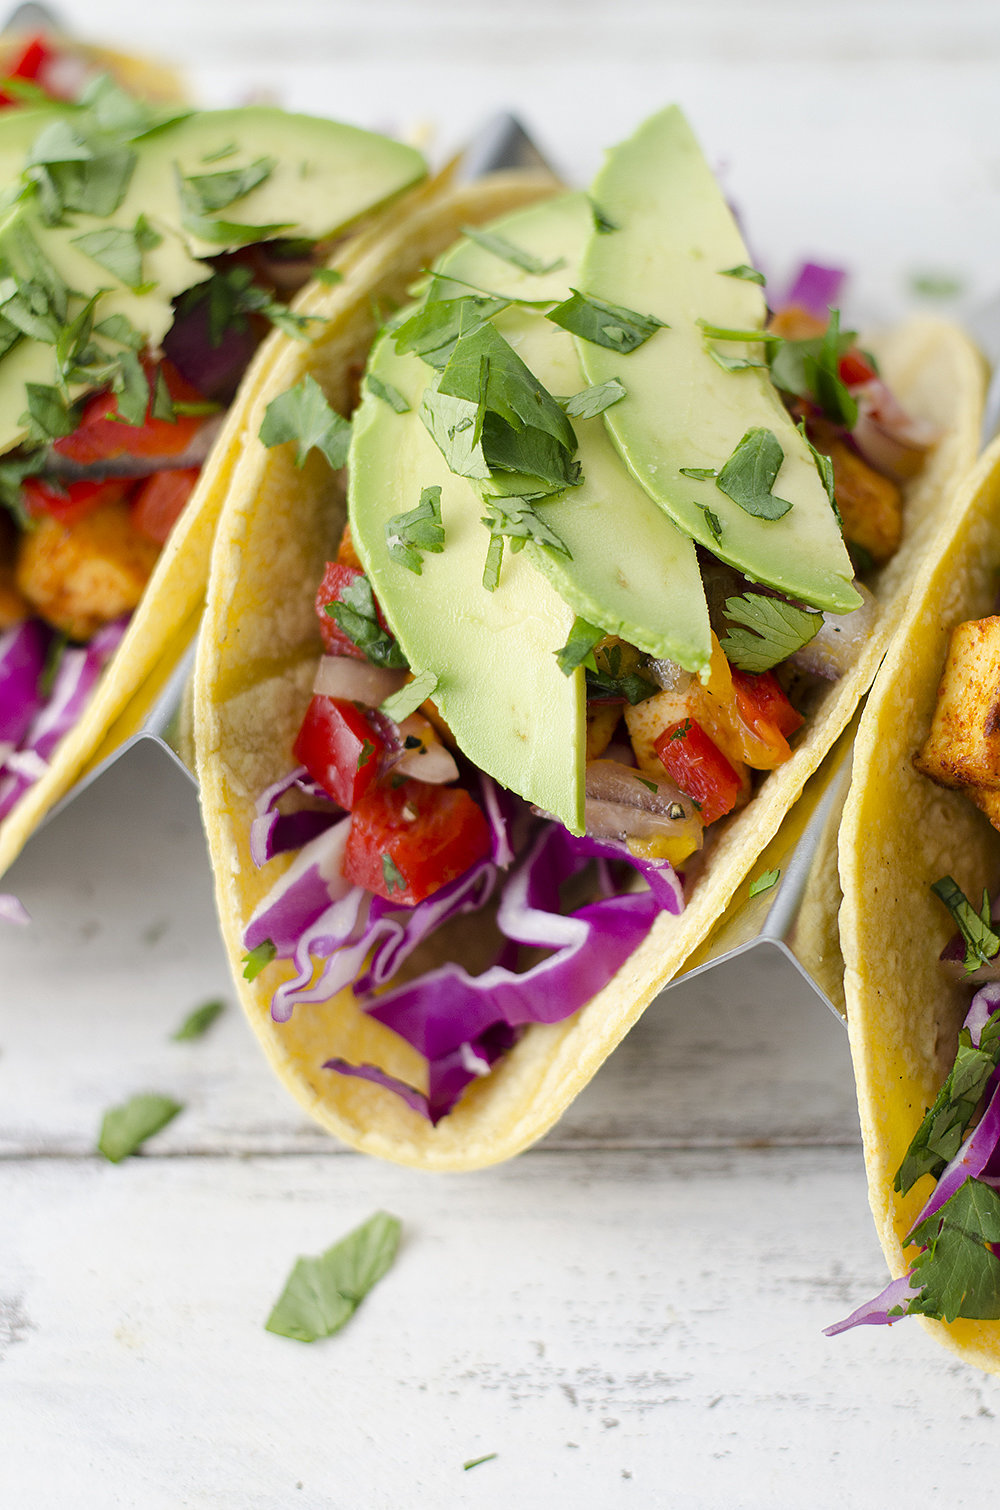 Have a Tropical Dinner With These Protein-Stuffed Tacos